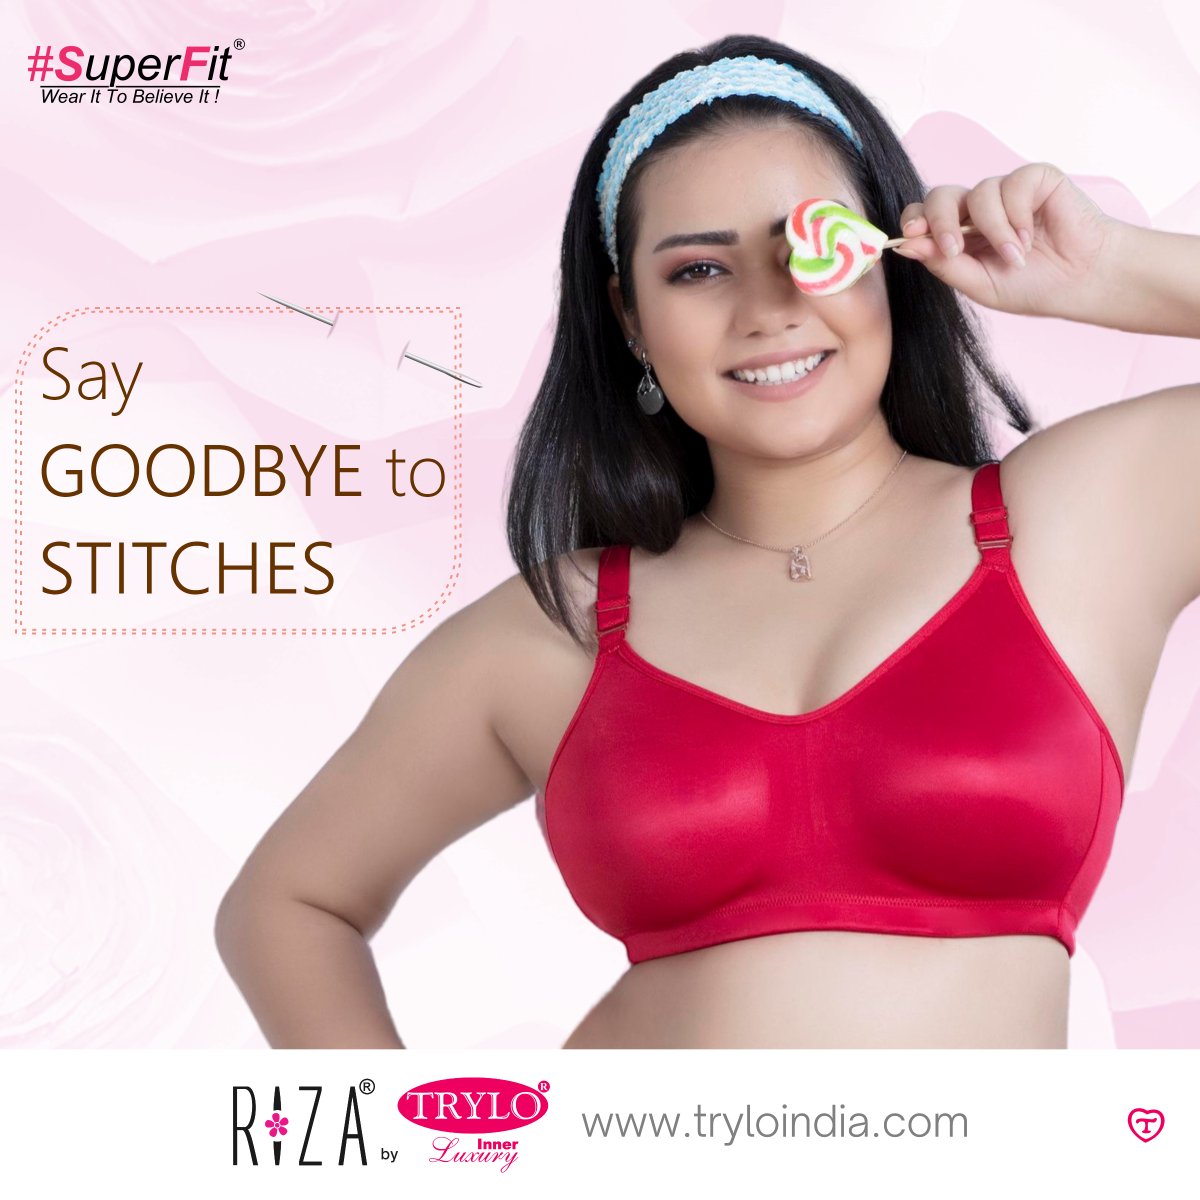 Ditch the itchy, uncomfortable bras and experience the revolution of Super Fit. 
Product shown - Riza Superfit

#TryloIndia #TryloIntimates #RizaIntimates #RizabyTrylo #RizaSuperfit #Seamlessbra #ConfidenceInStyle